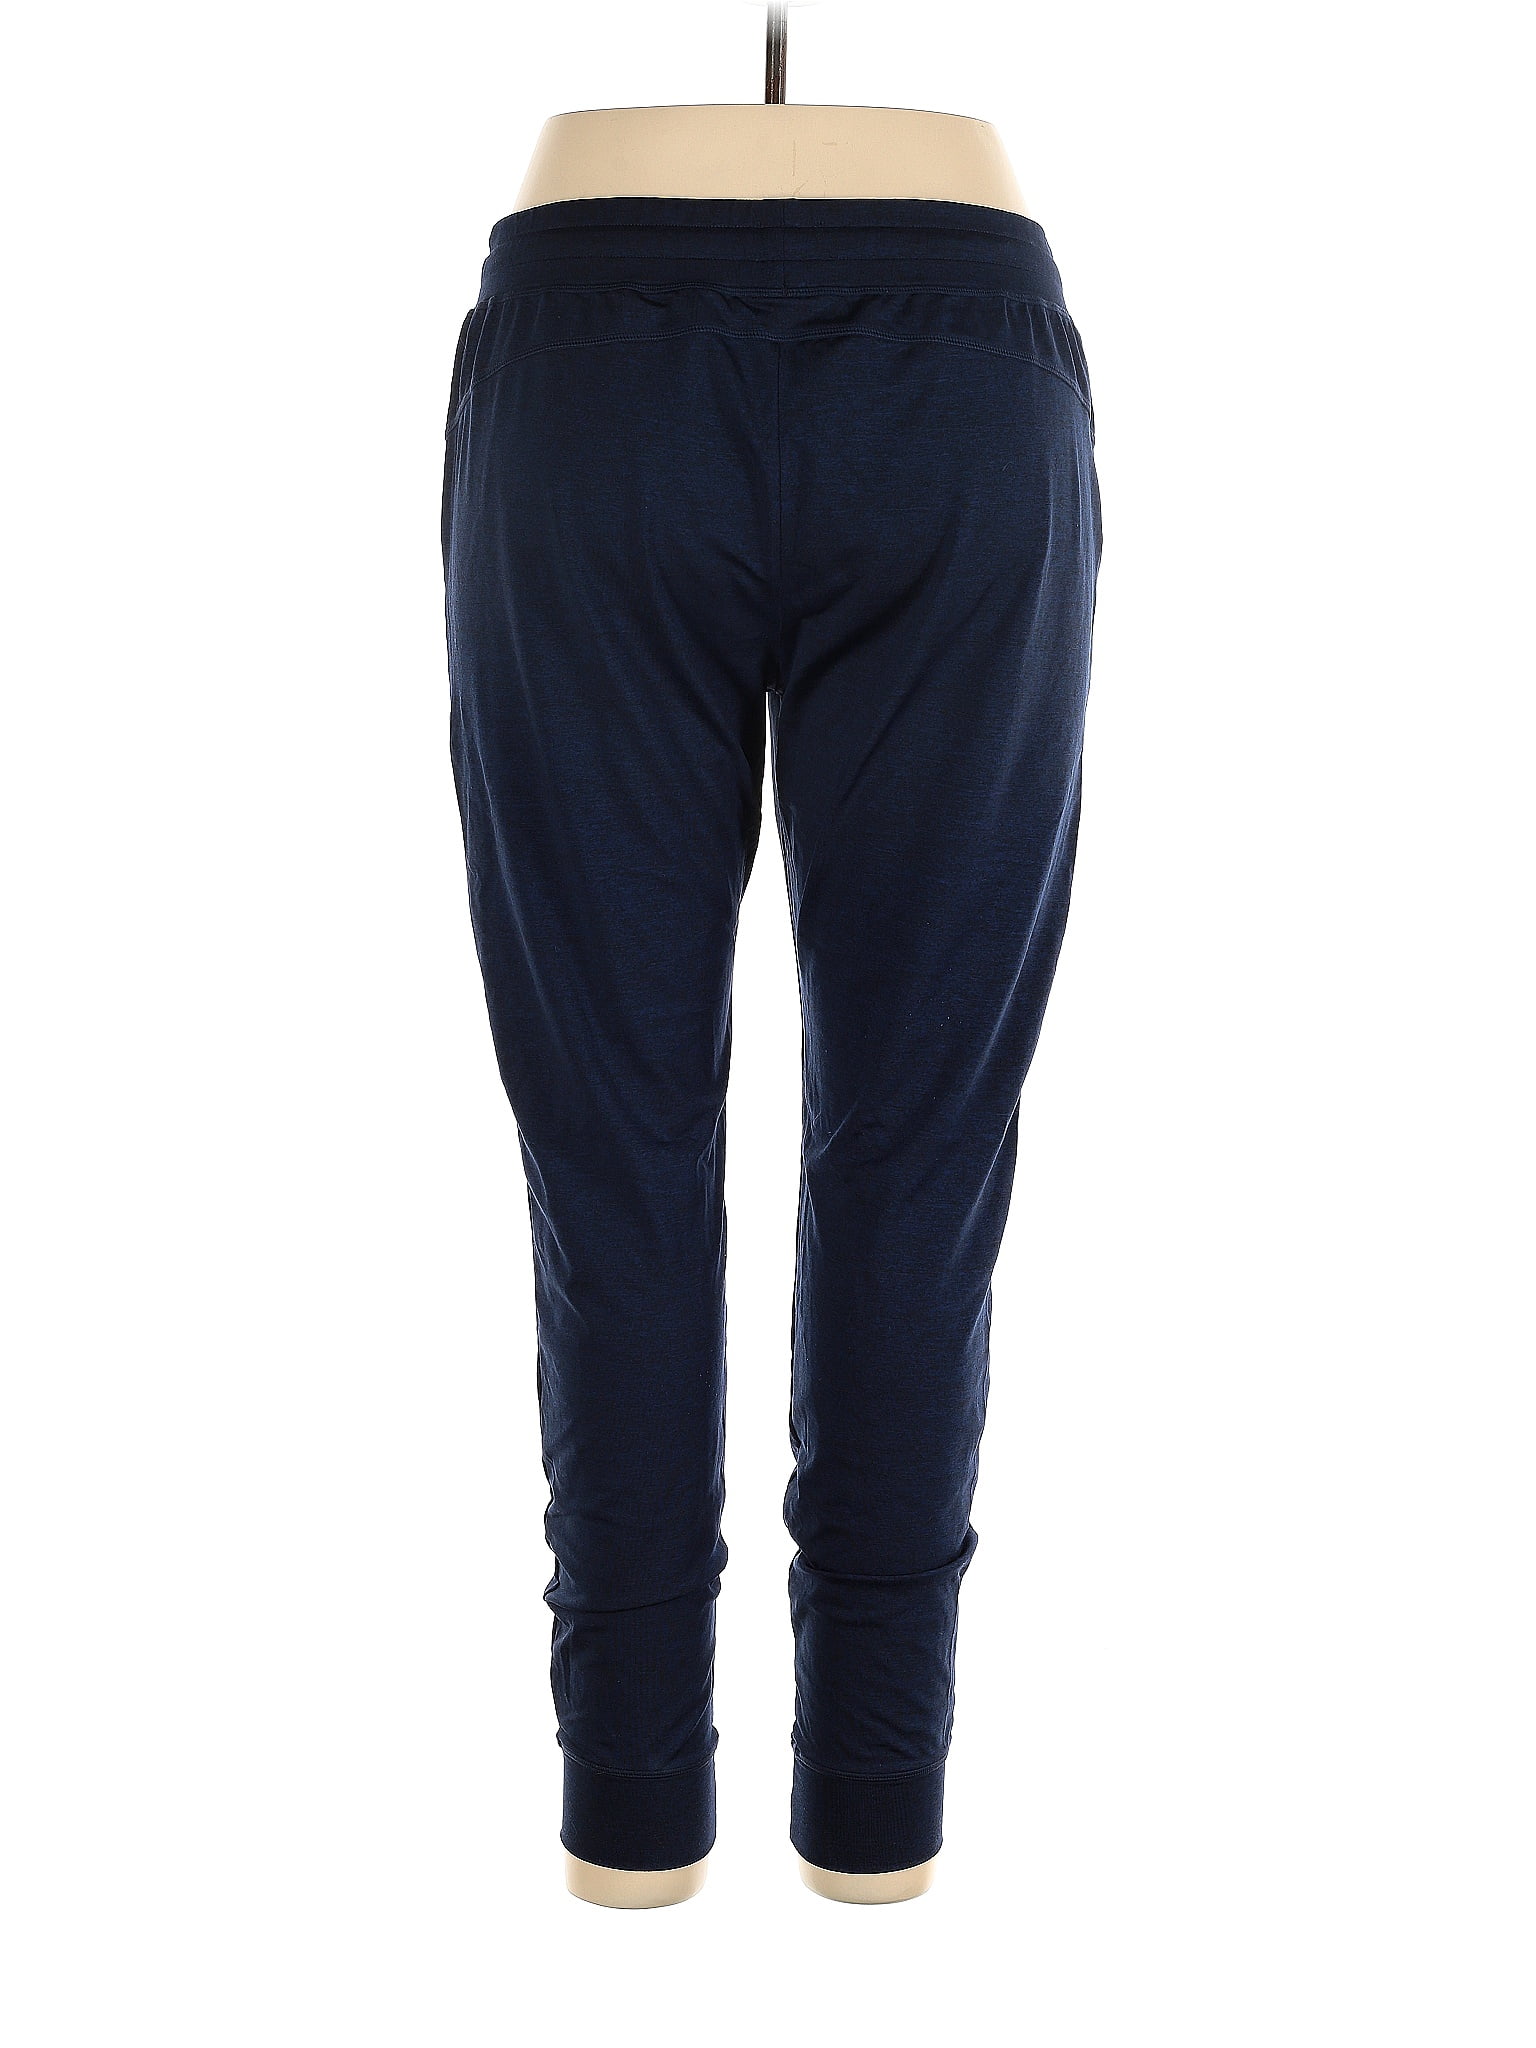 Zyia Active Solid Navy Blue Sweatpants Size XL - 61% off